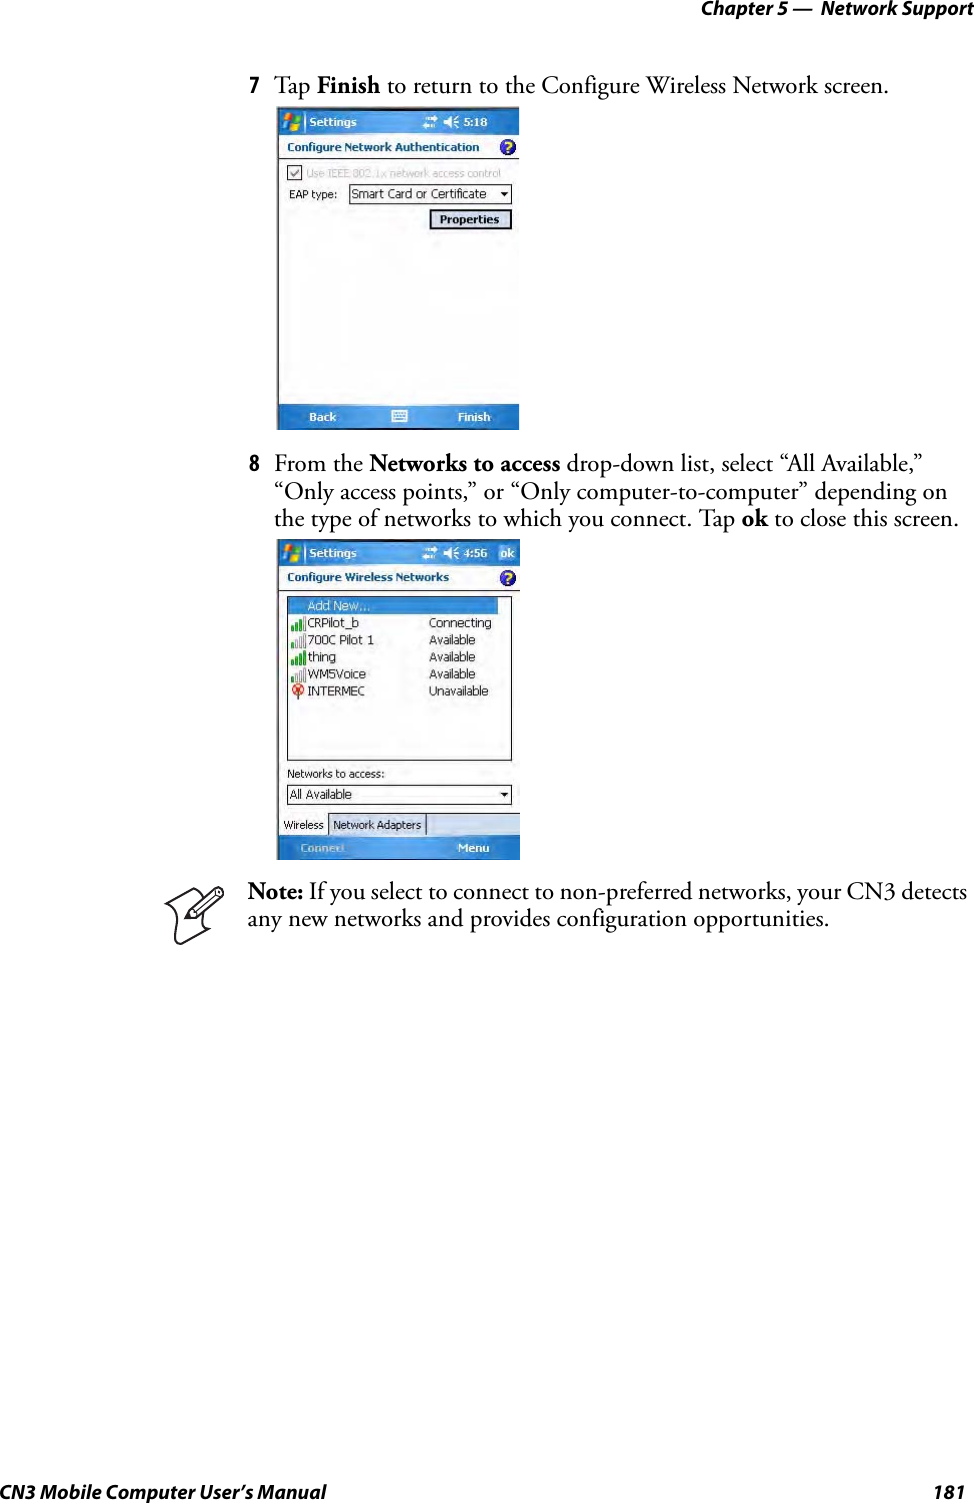 Chapter 5 —  Network SupportCN3 Mobile Computer User’s Manual 1817Tap Finish to return to the Configure Wireless Network screen.8From the Networks to access drop-down list, select “All Available,” “Only access points,” or “Only computer-to-computer” depending on the type of networks to which you connect. Tap ok to close this screen.Note: If you select to connect to non-preferred networks, your CN3 detects any new networks and provides configuration opportunities.